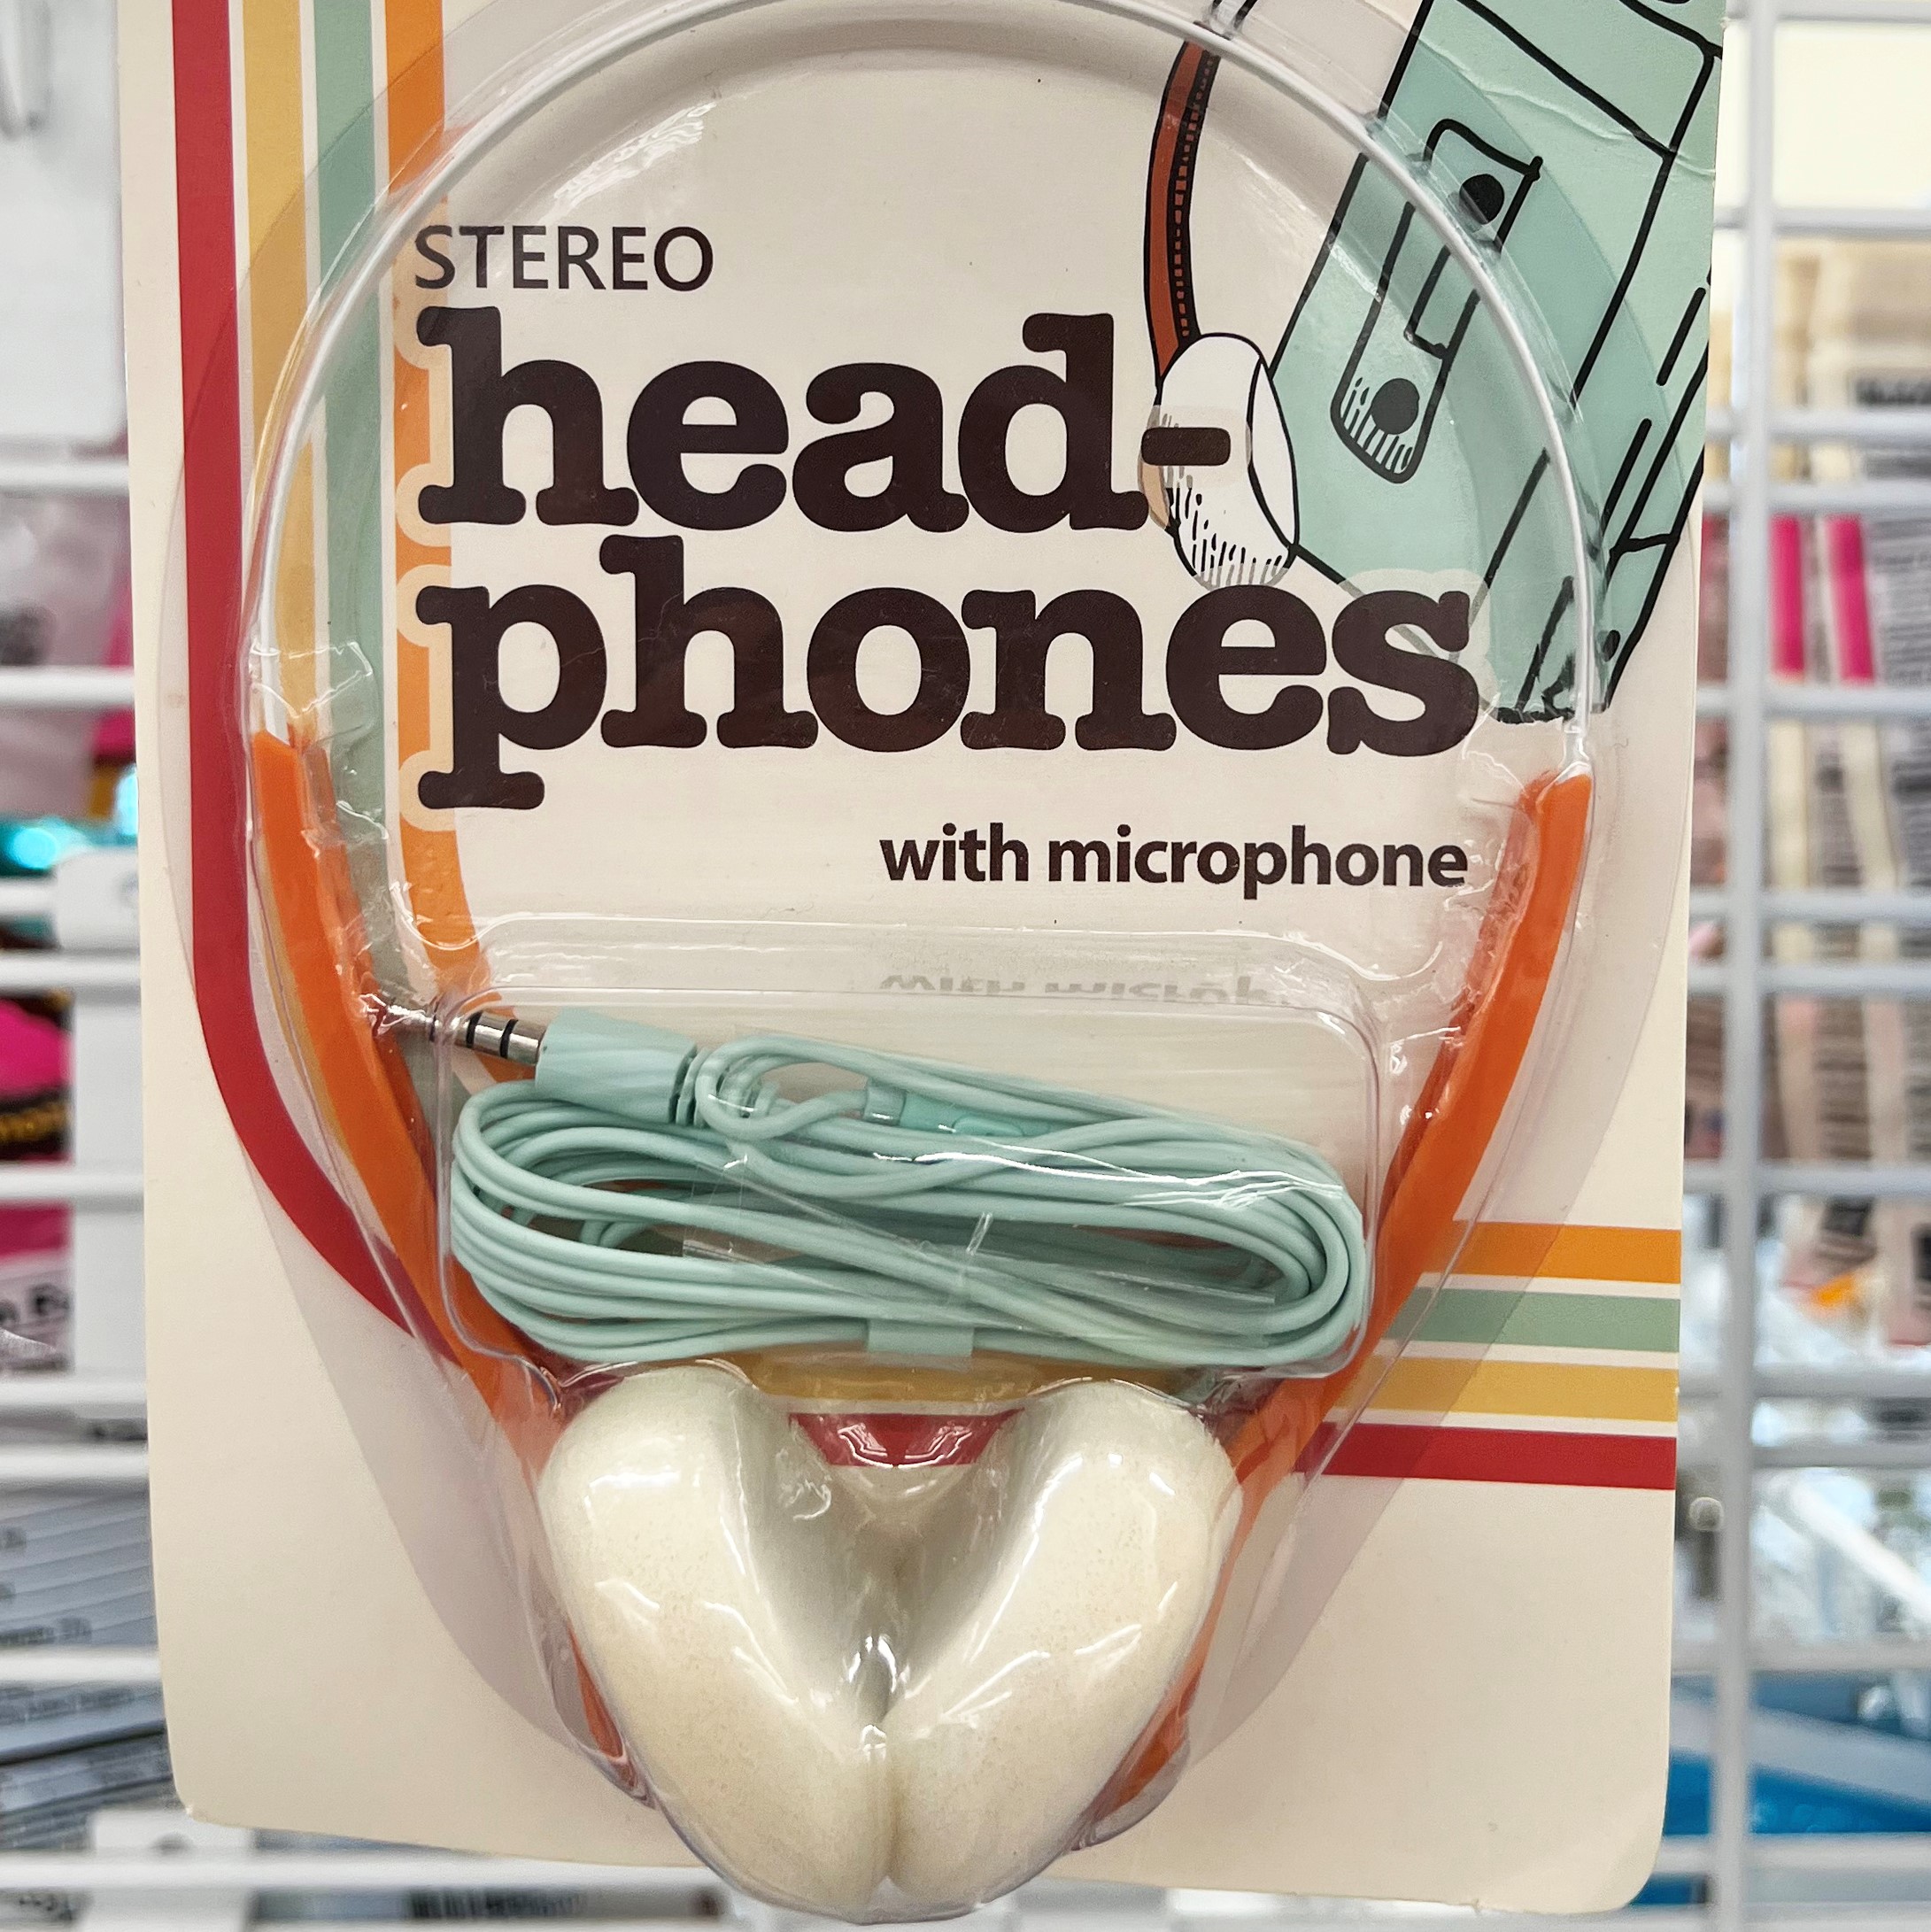 Stereo Headphones at a great price from dd's discounts.